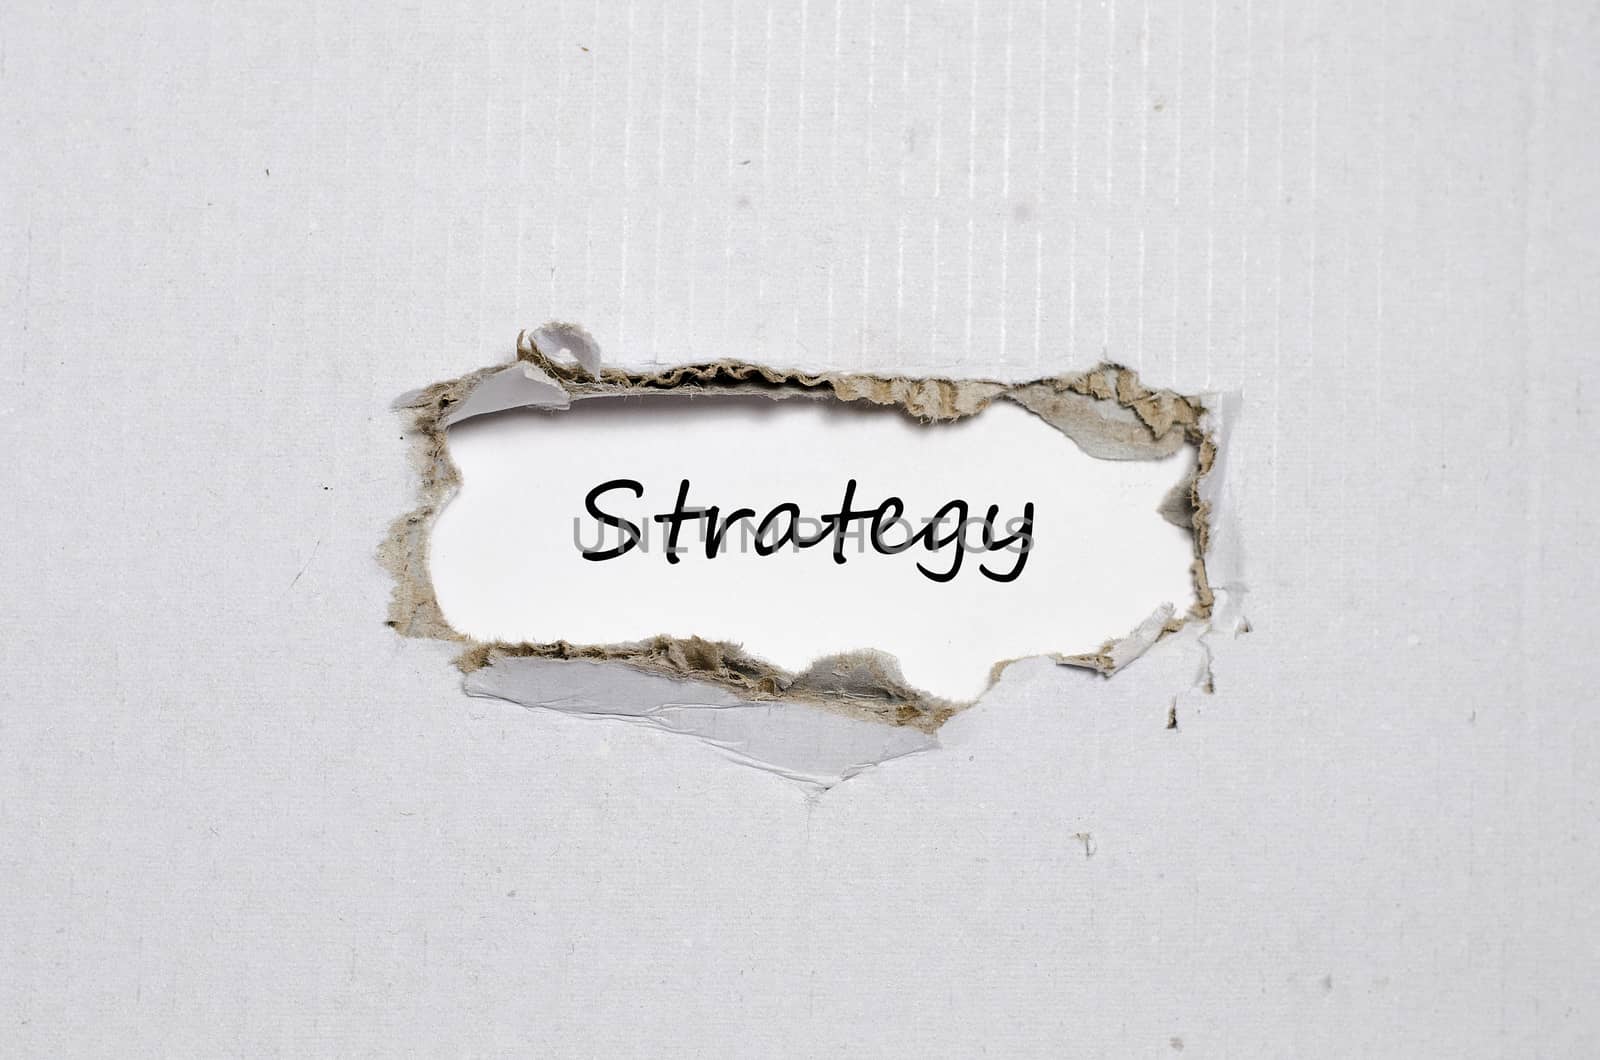 The word strategy appearing behind torn paper